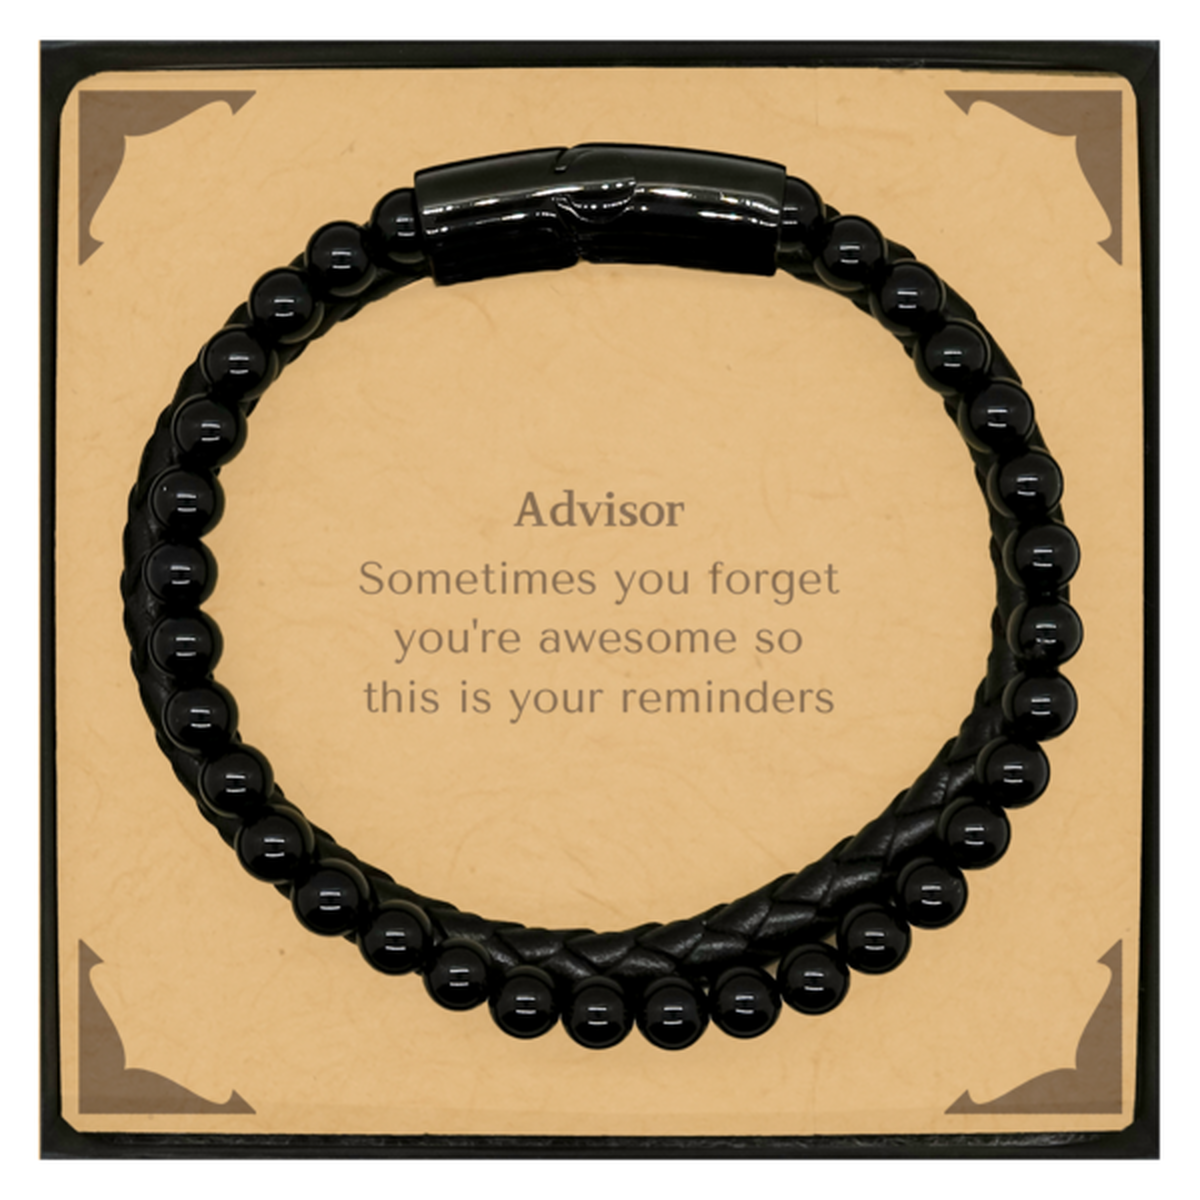 Sentimental Advisor Stone Leather Bracelets, Advisor Sometimes you forget you're awesome so this is your reminders, Graduation Christmas Birthday Gifts for Advisor, Men, Women, Coworkers